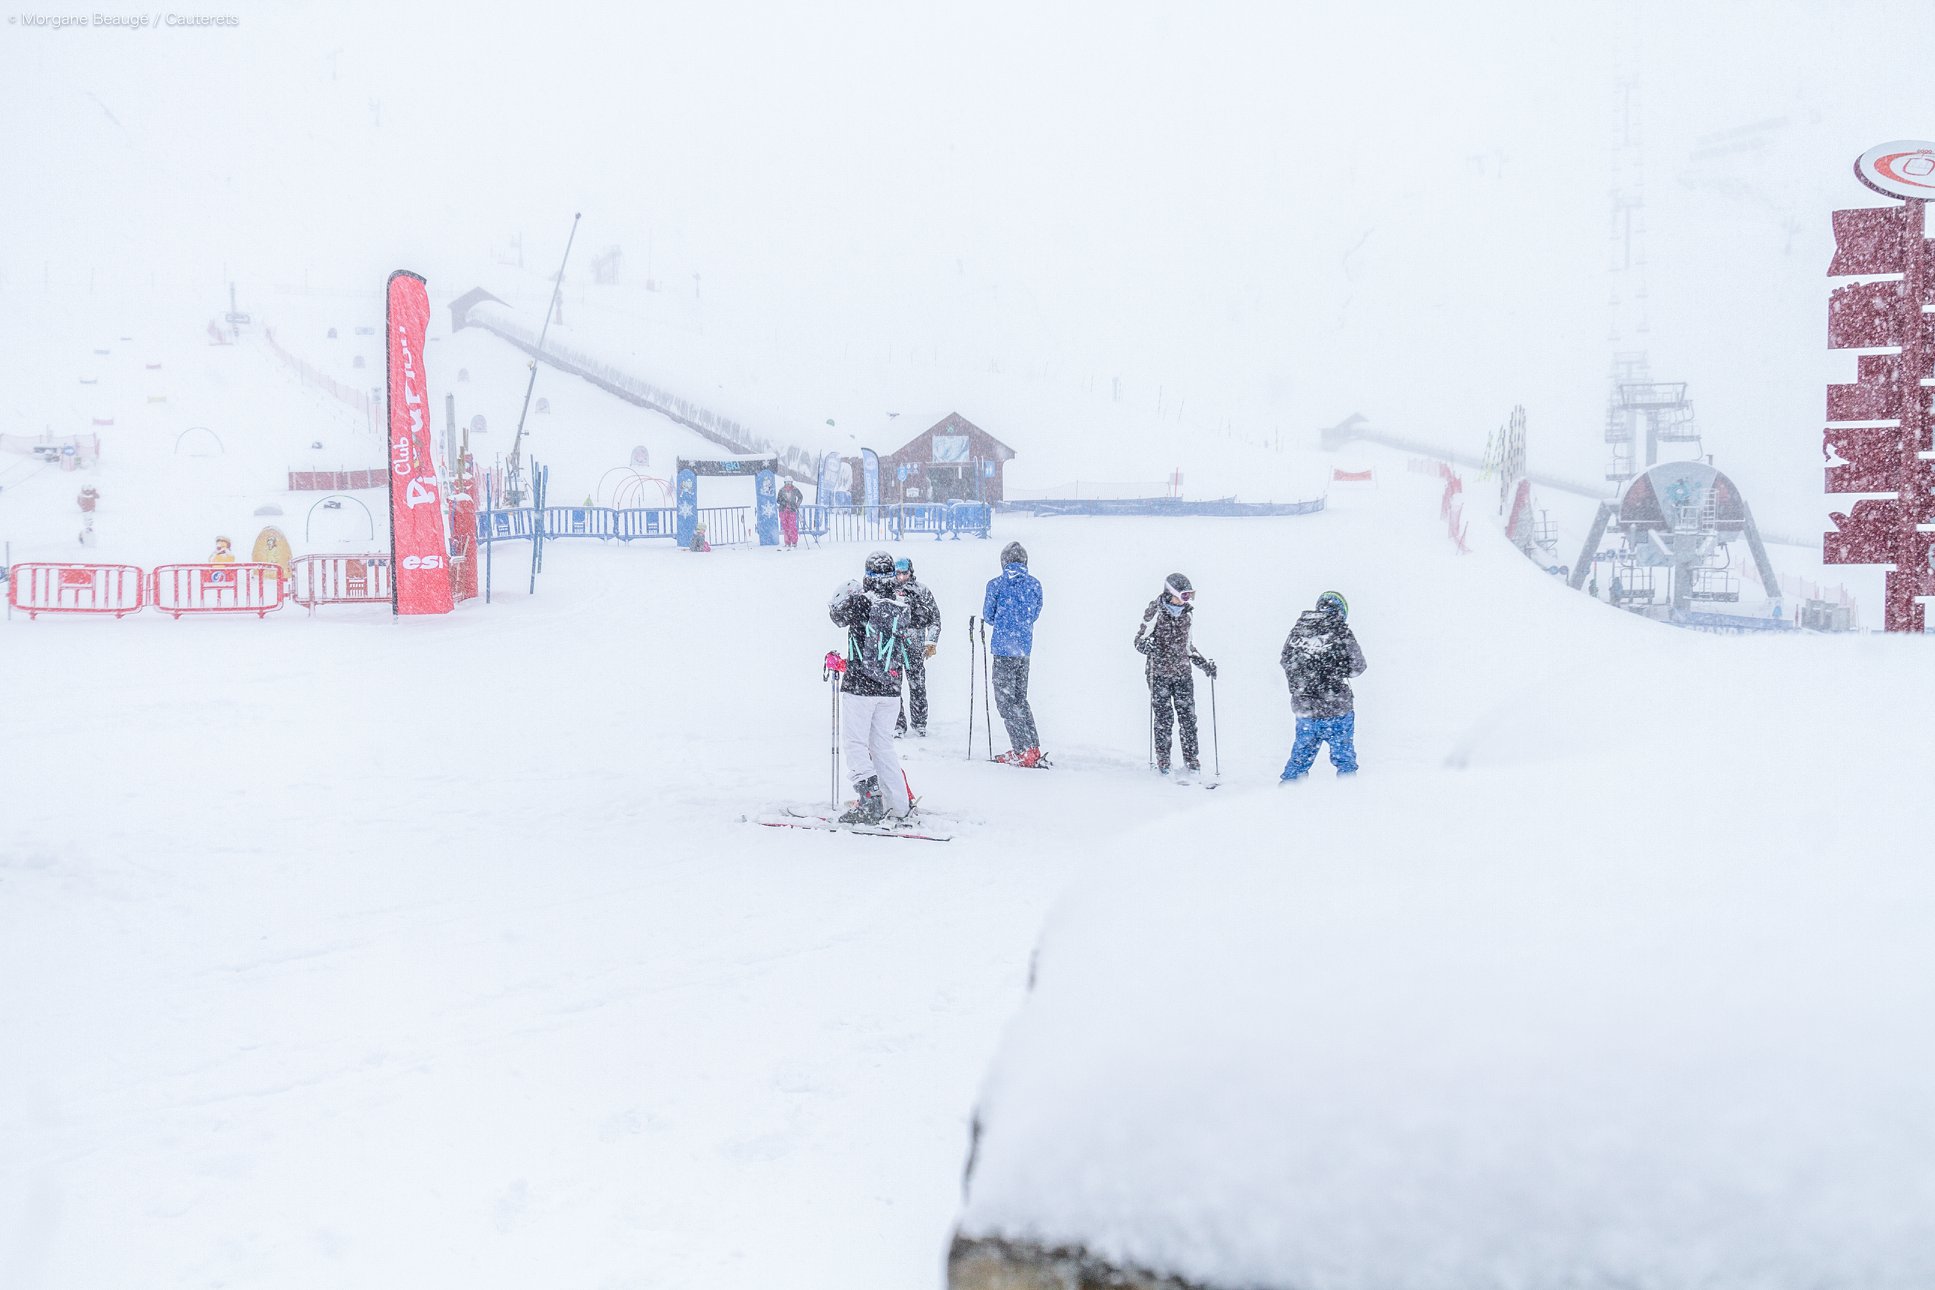 up to 50cm/20" more snow expected at Cauterets